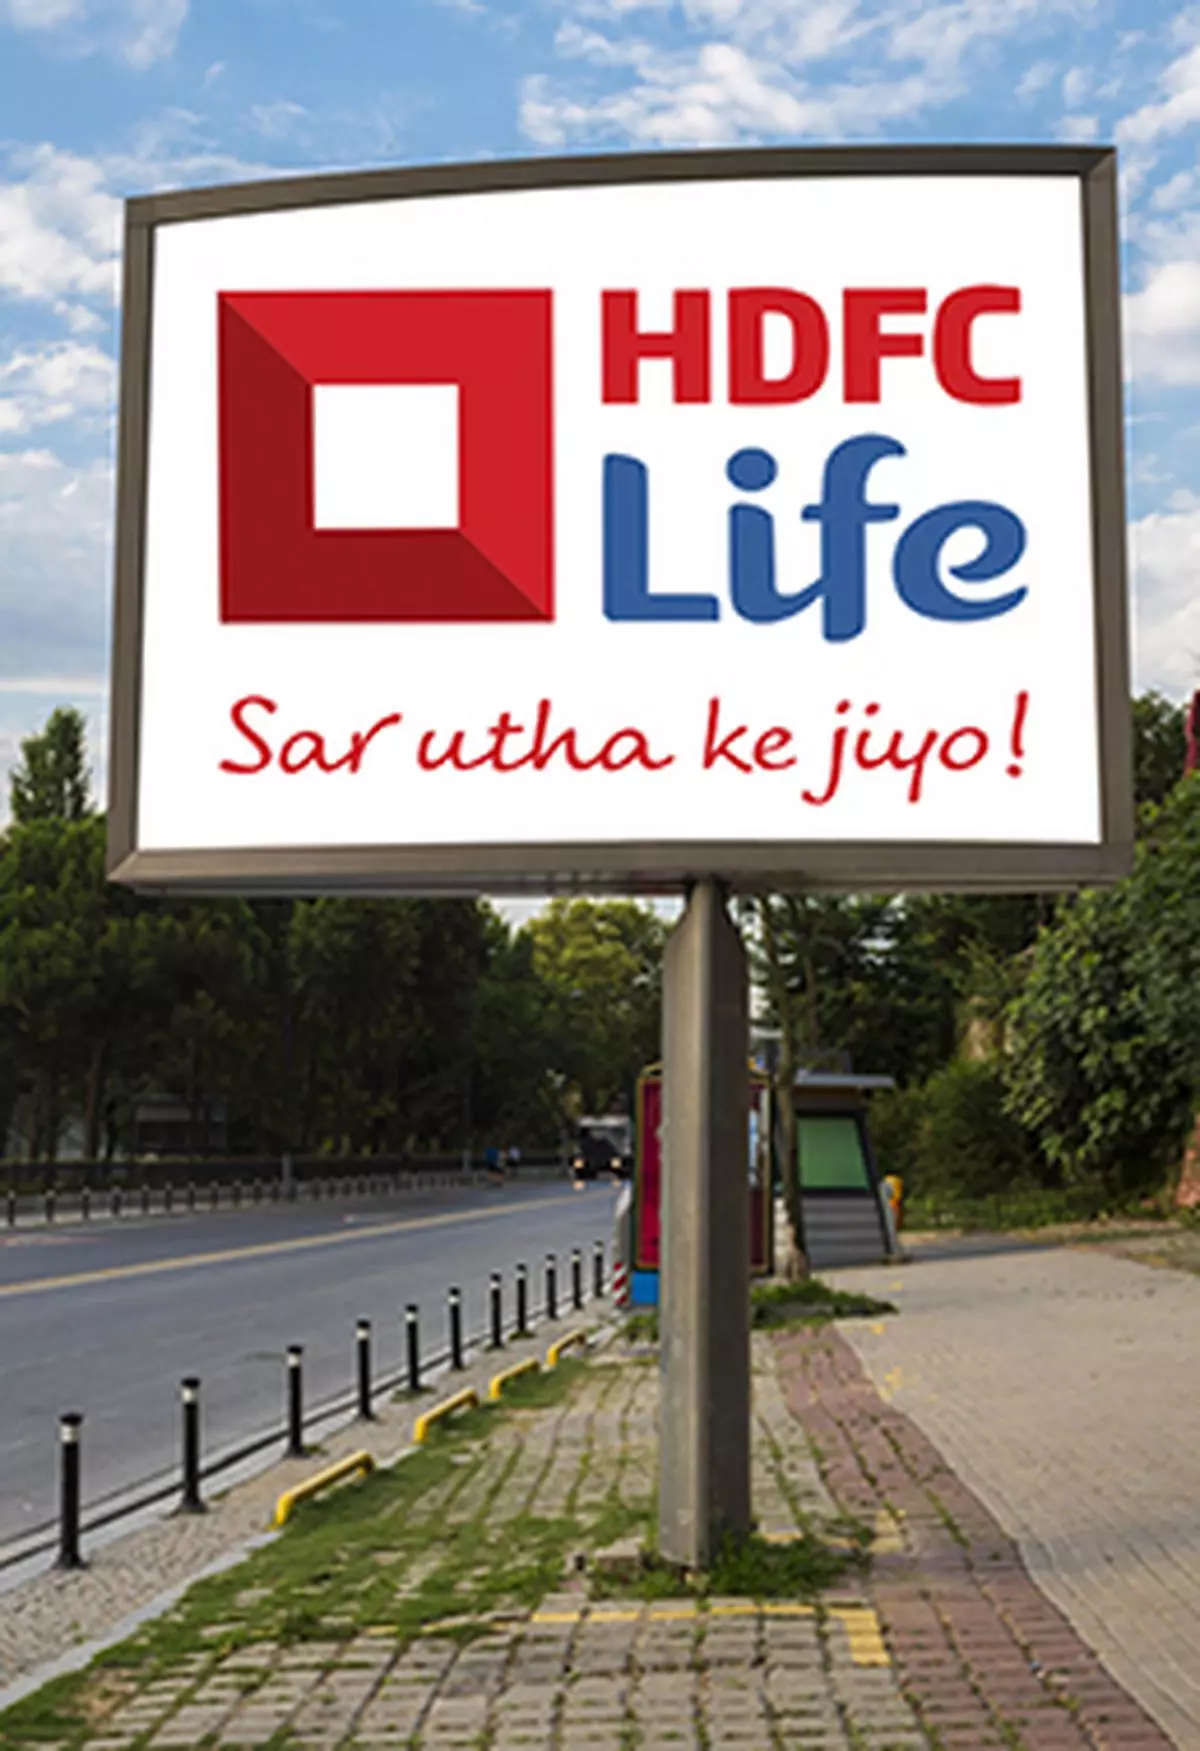 exide life: HDFC Life completes acquisition of Exide Life; to start merger  soon - The Economic Times